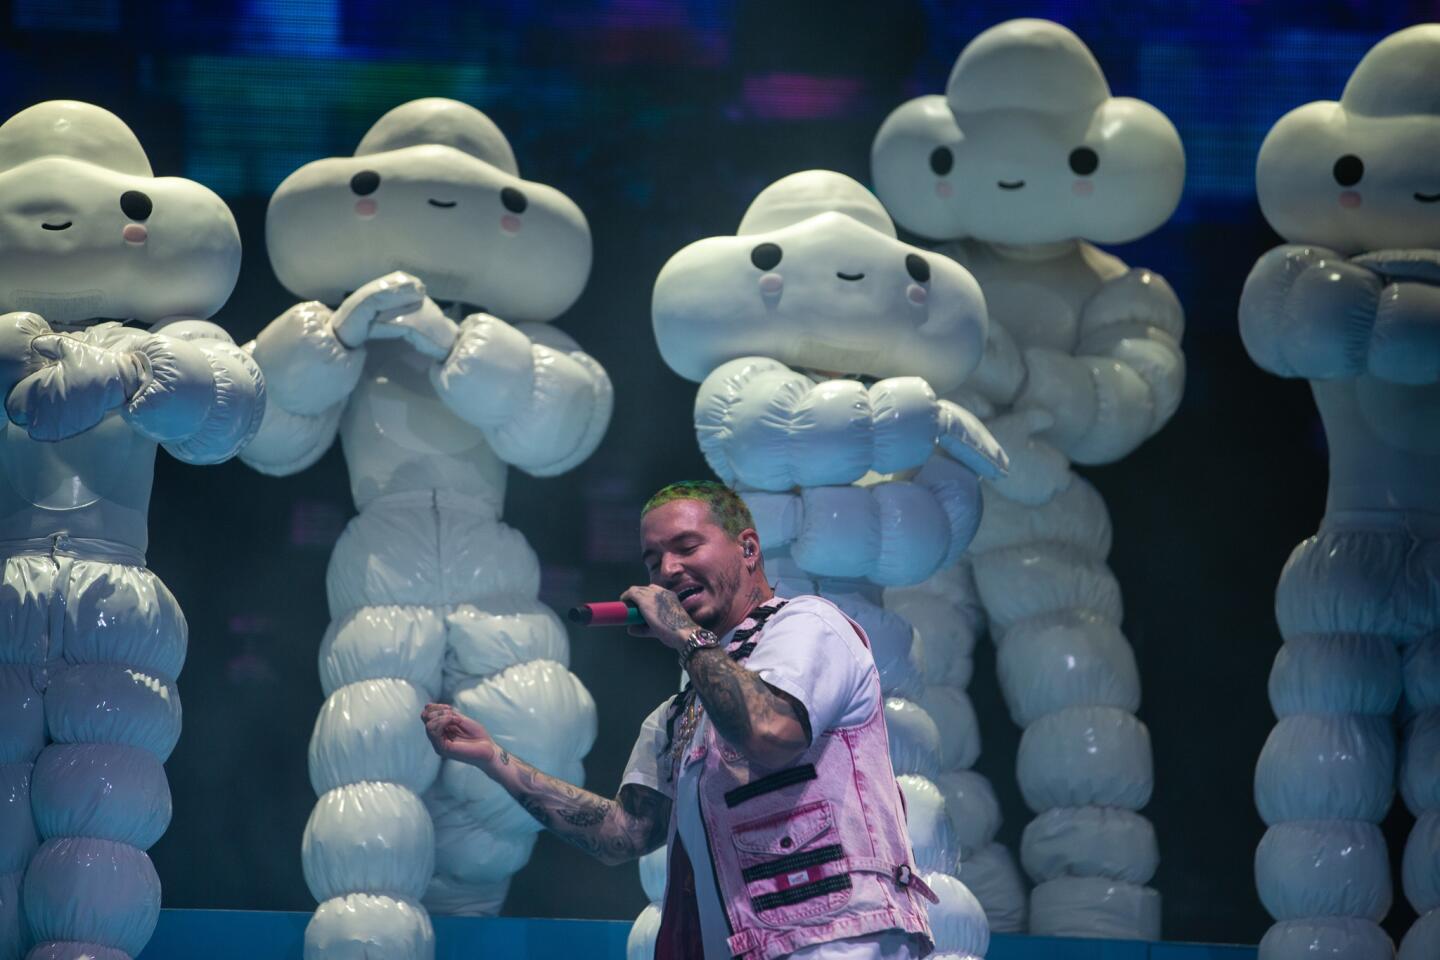 J Balvin performs during Weekend 2 of the Coachella Valley Music and Arts Festival.